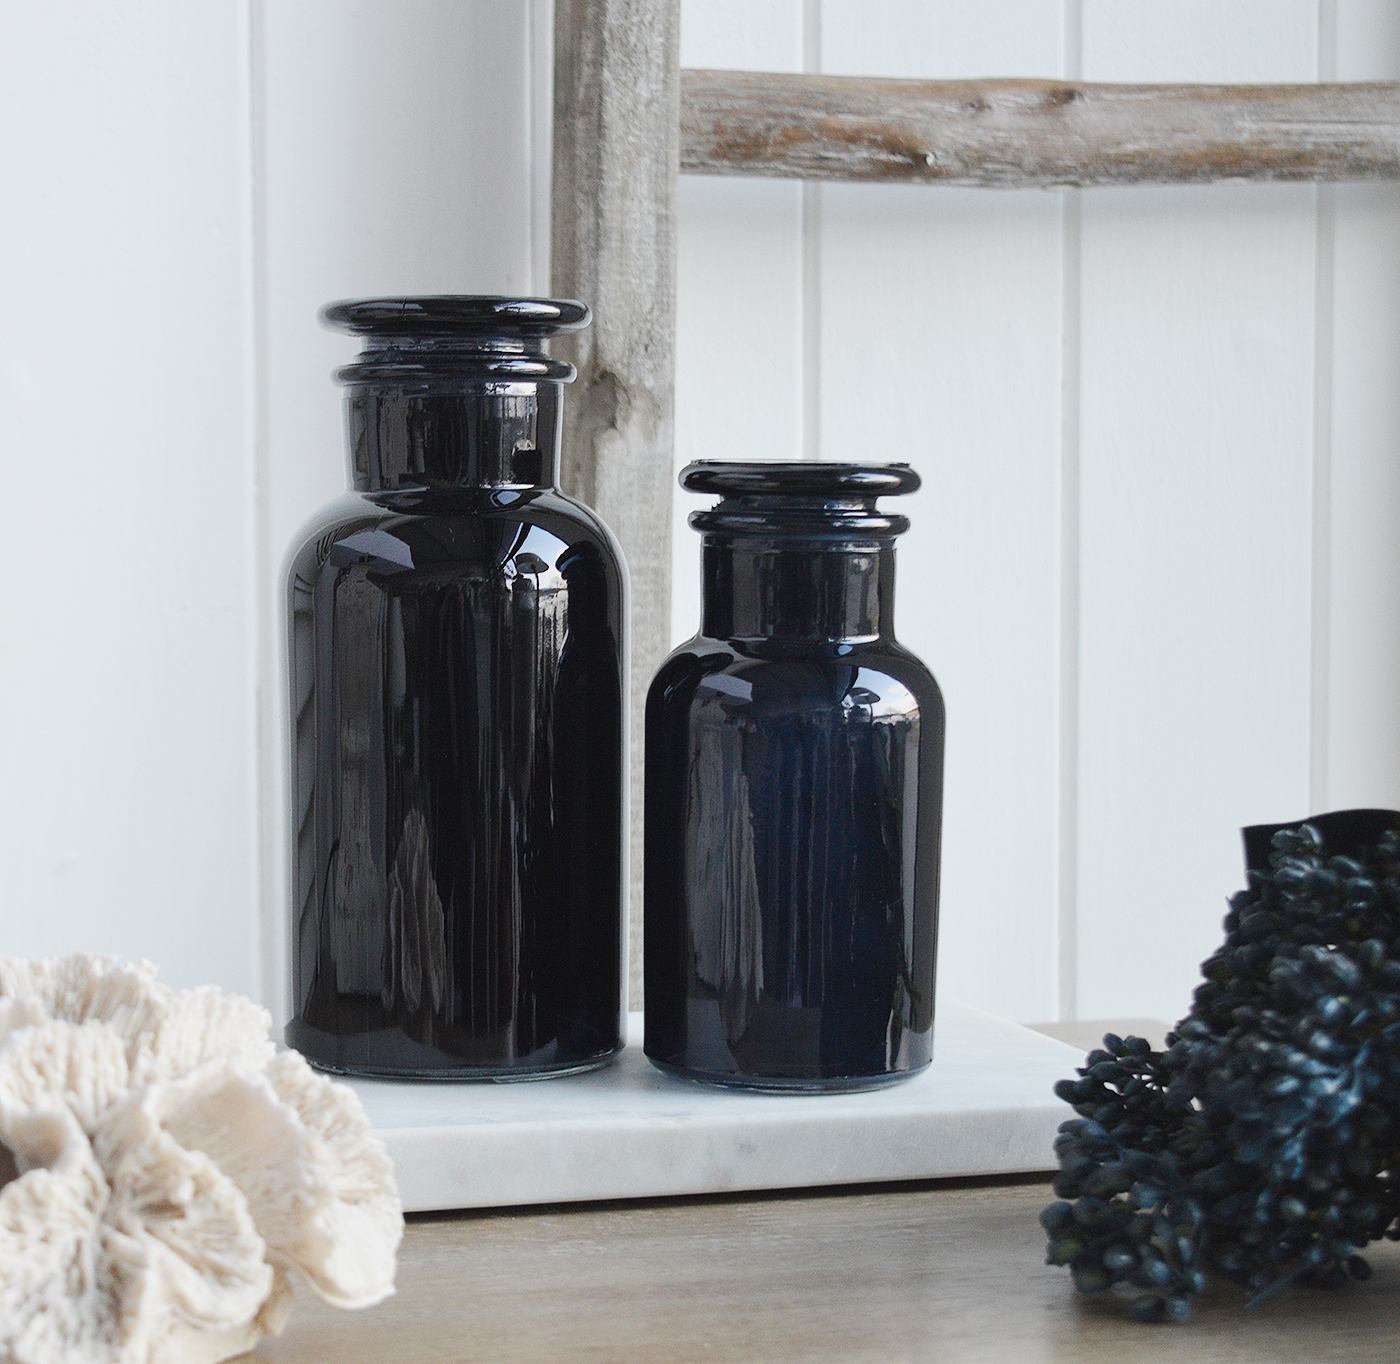 Decorative Apothecary blue black glass bottle with stopper from The White Lighthouse New England furniture and home accessories for country, coastal and city homes and iteriors